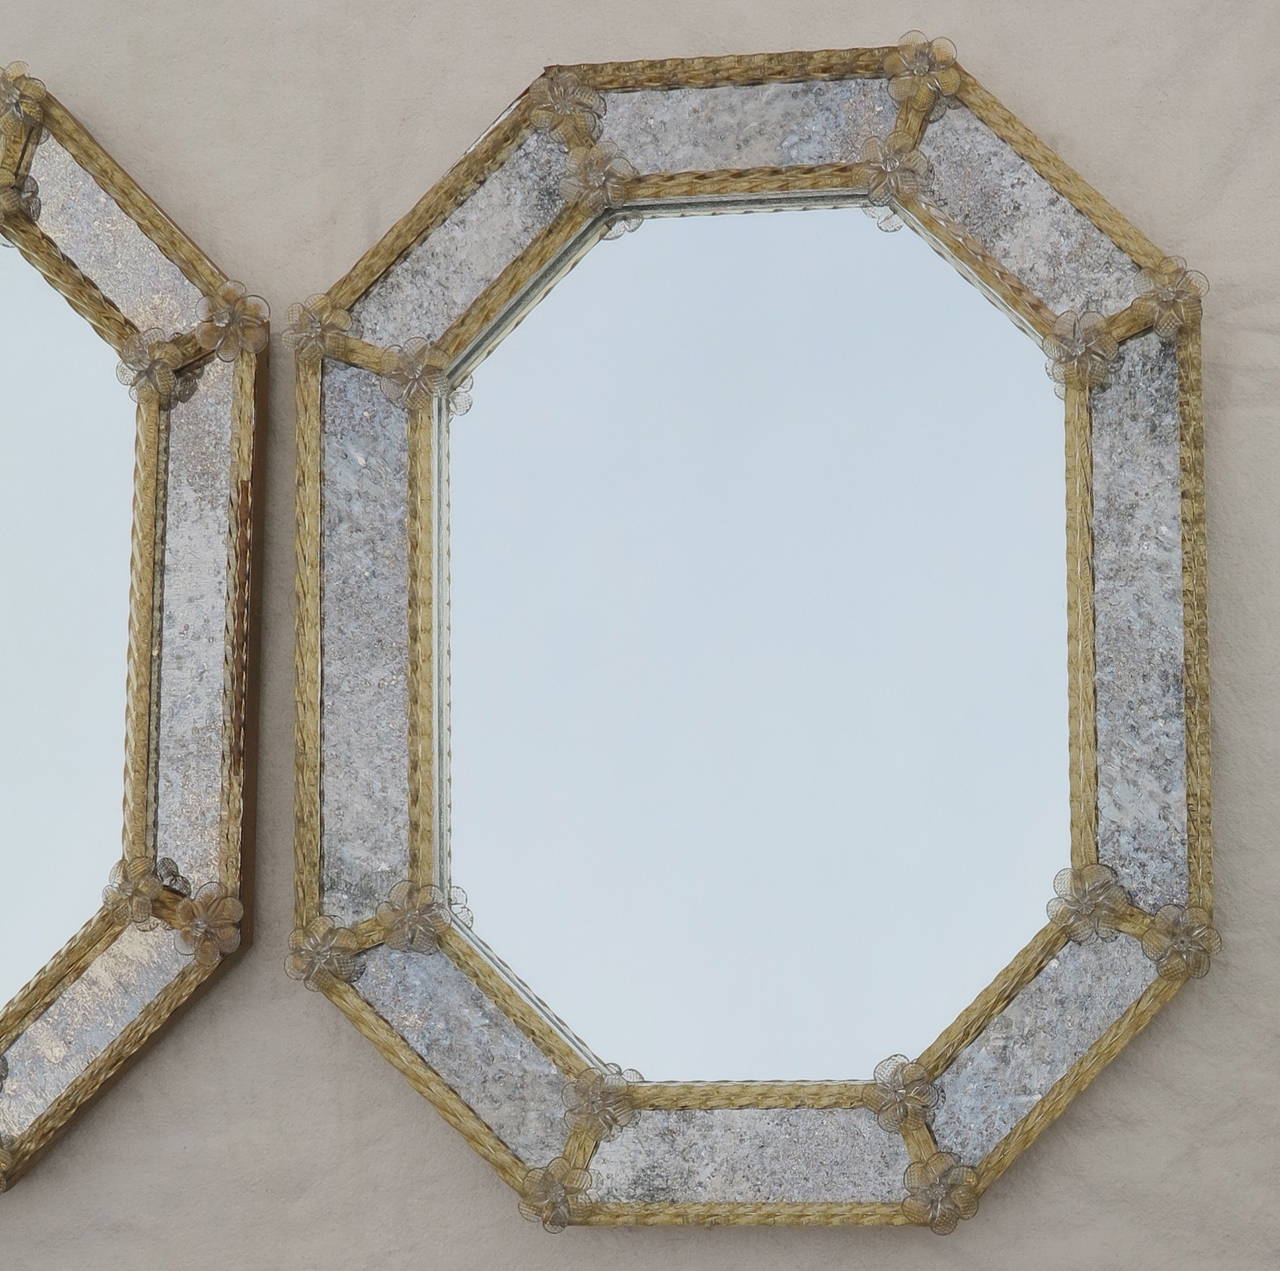 Italian Pair of Octagonal Mirrors Veronése with Parecloses and Oxidized Mirror